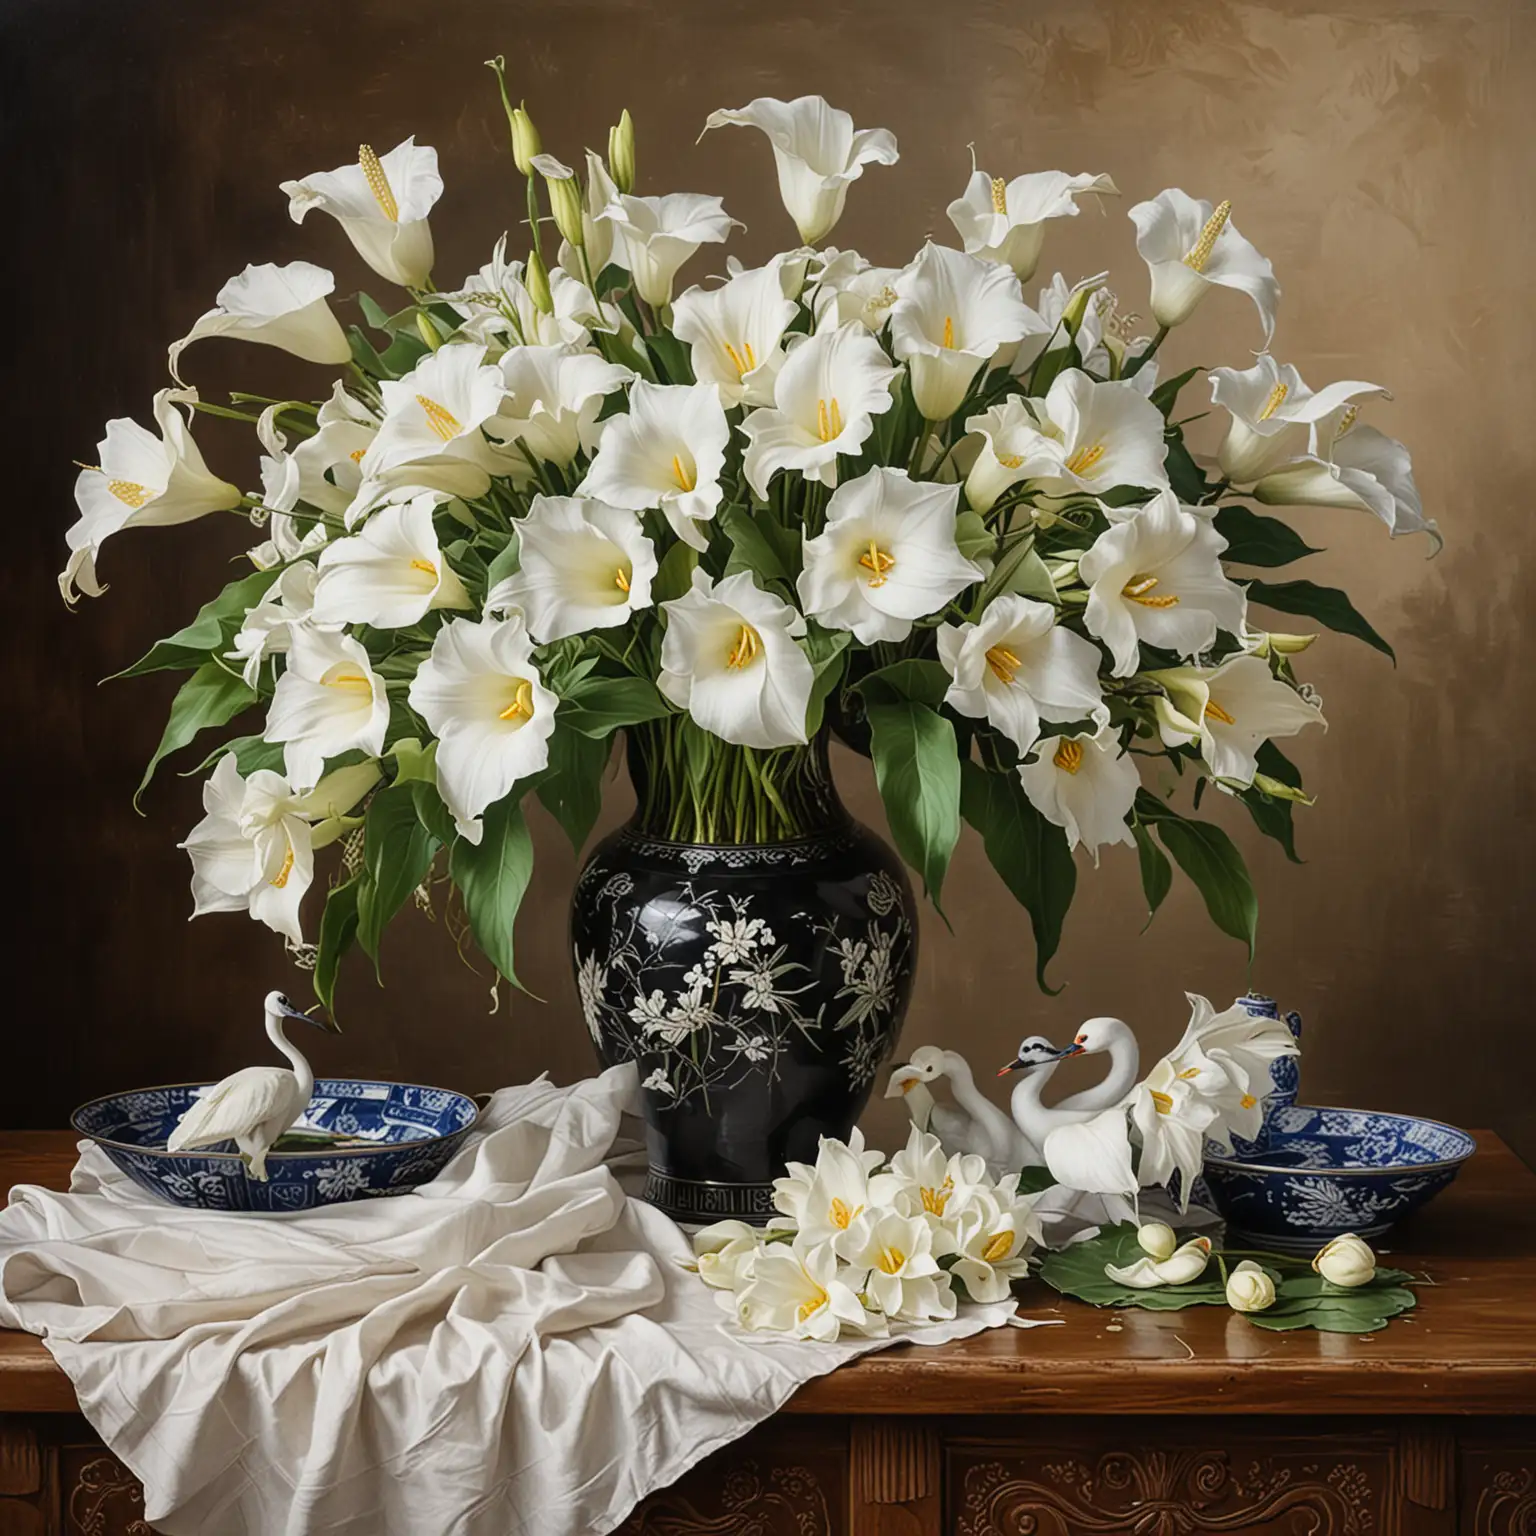 Oriental Vase Still Life Painting with White Crane Birds and Calla Lilies